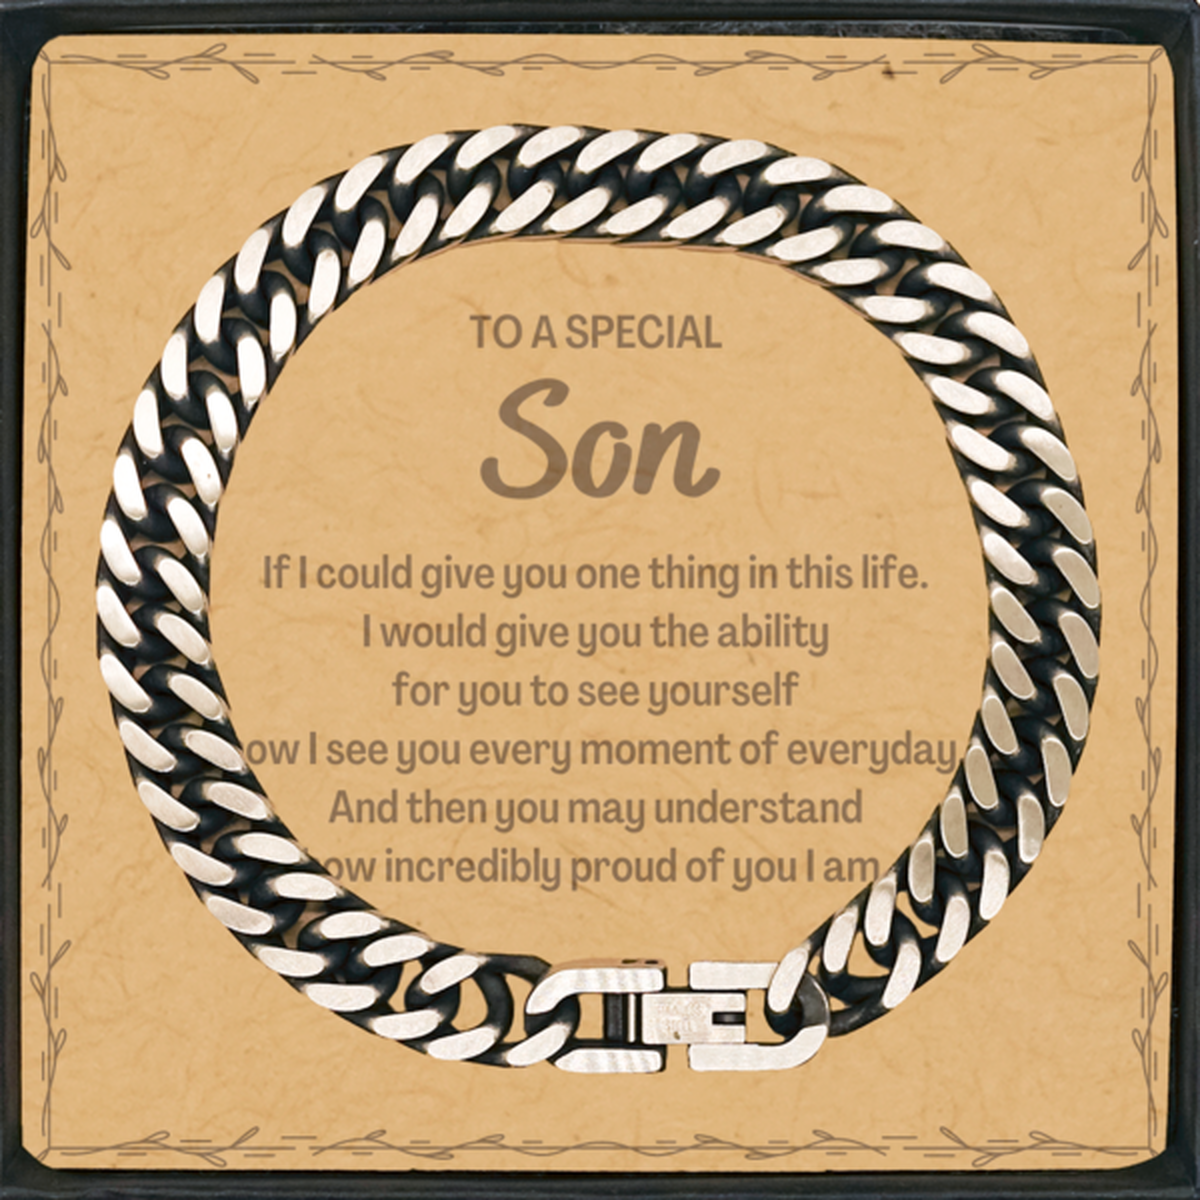 To My Son Cuban Link Chain Bracelet, Gifts For Son Message Card, Inspirational Gifts for Christmas Birthday, Epic Gifts for Son To A Special Son how incredibly proud of you I am